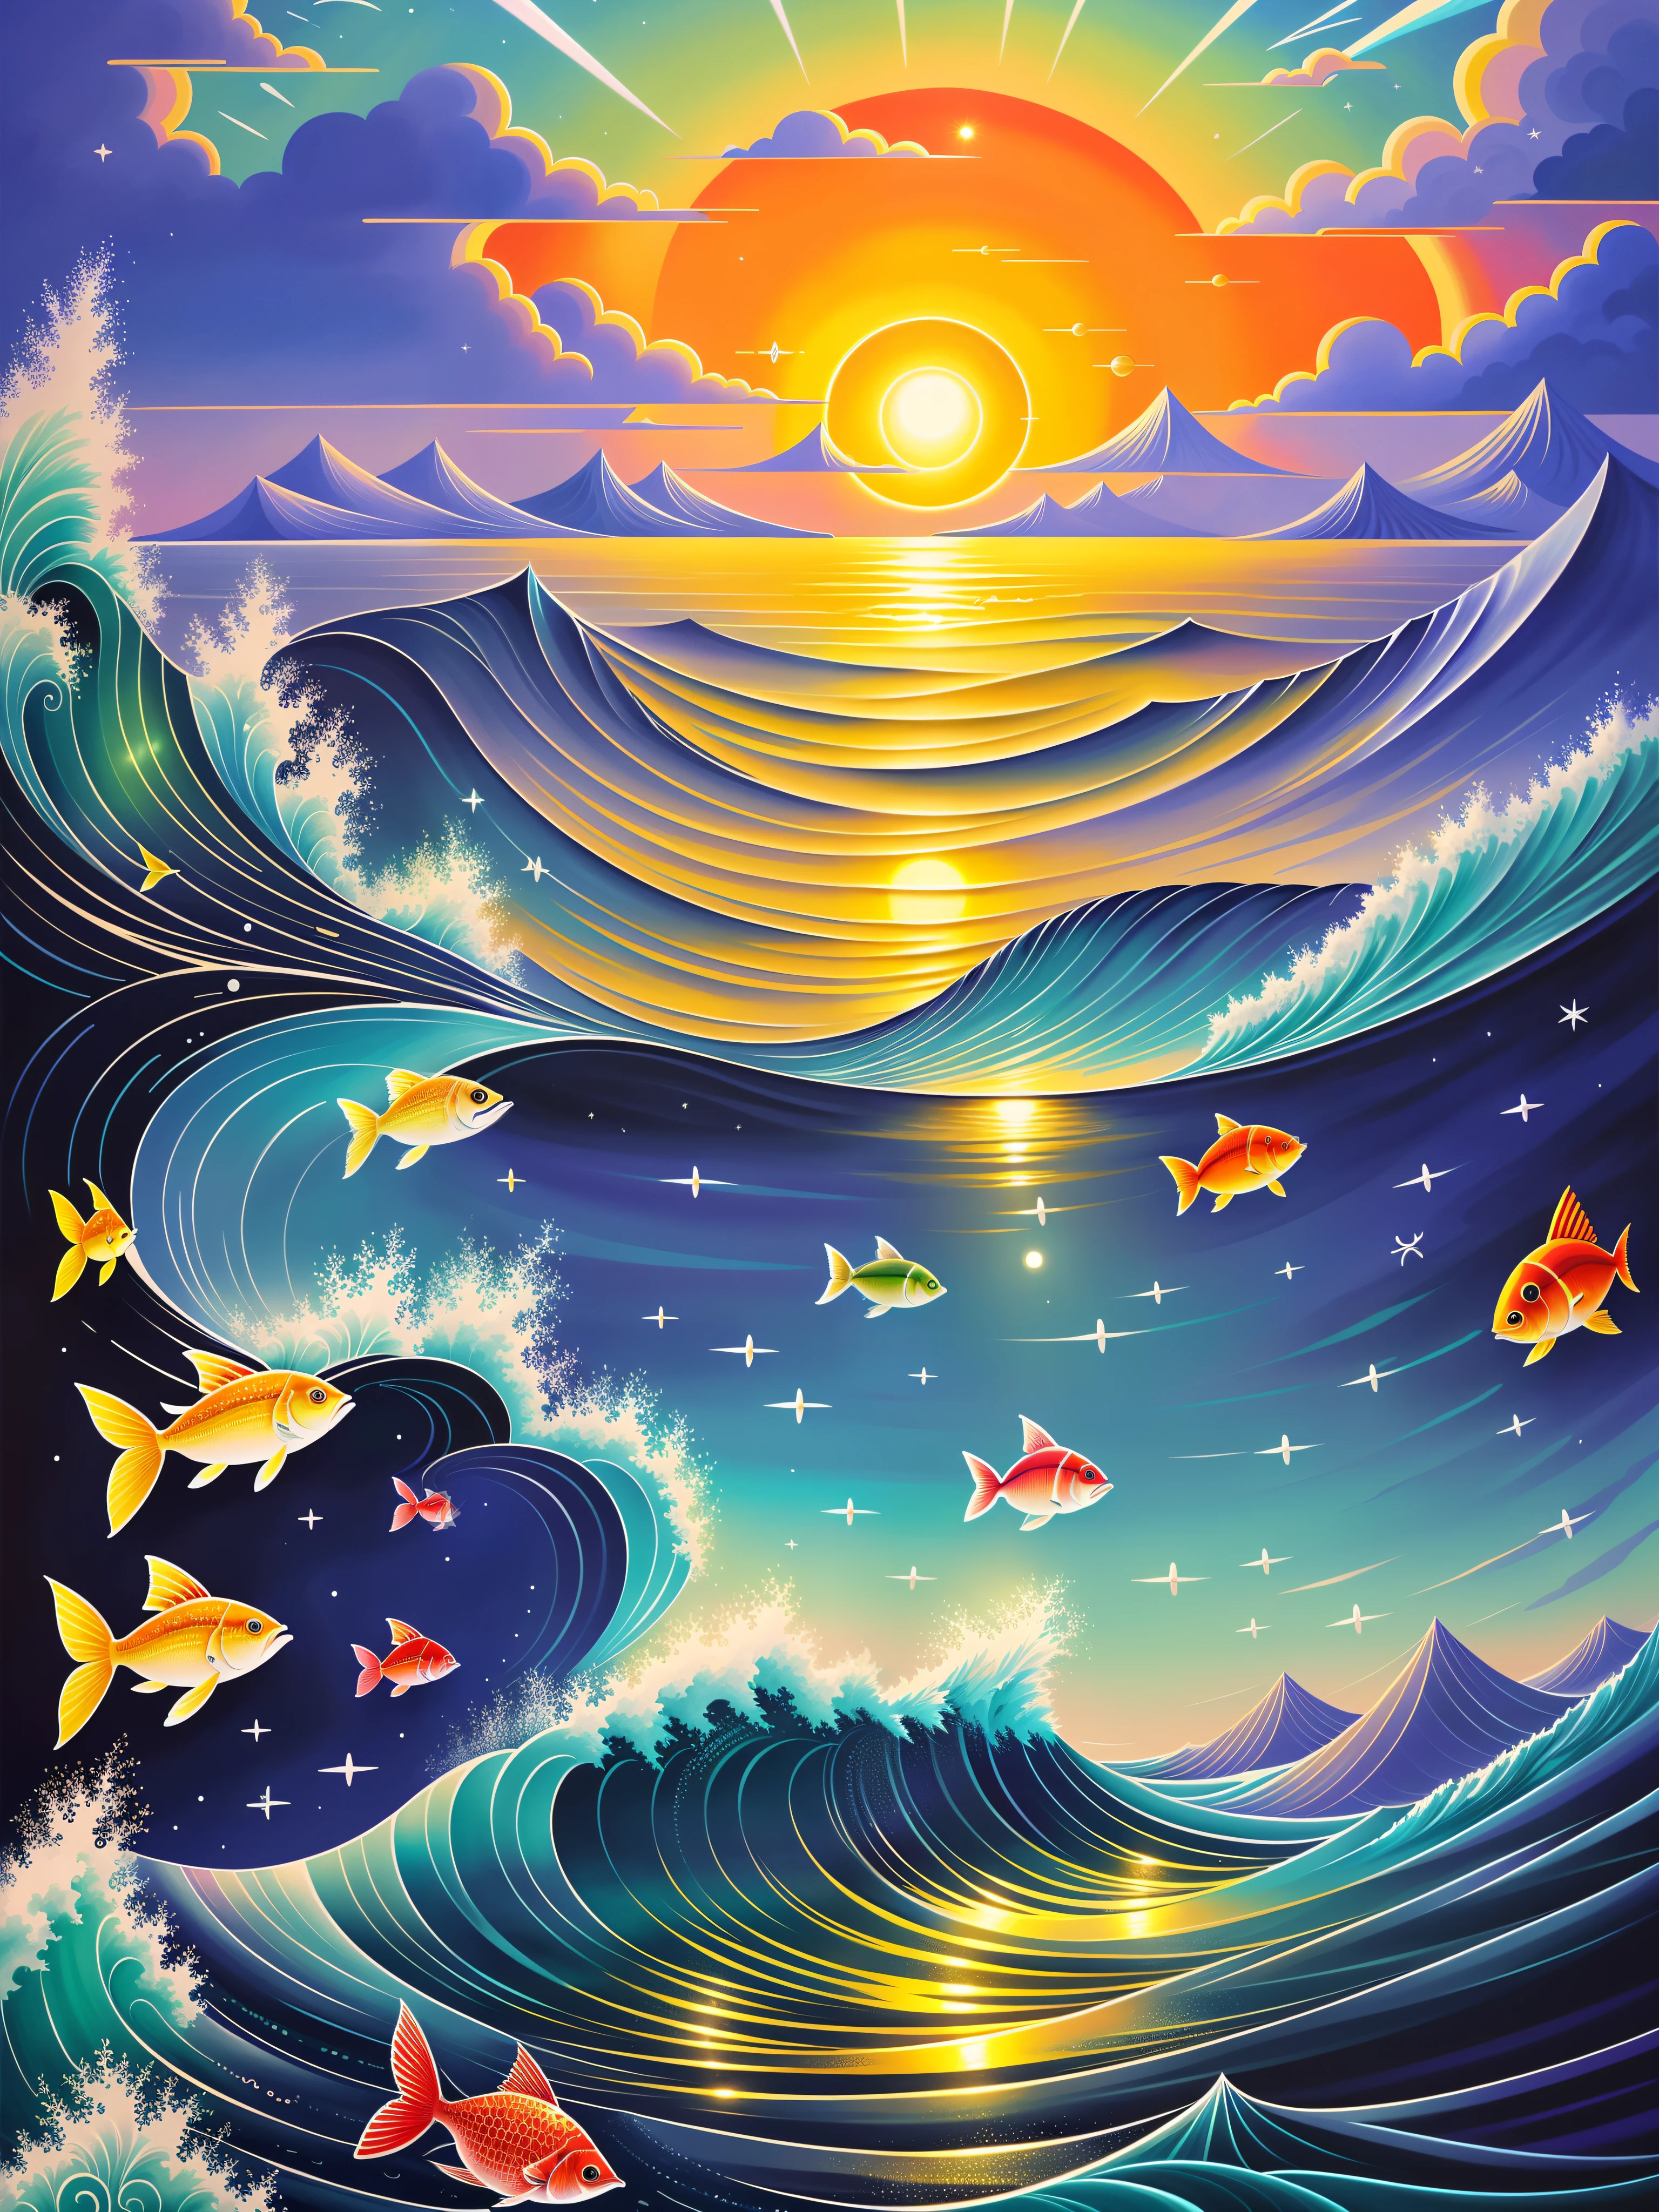 Ocean scene with colorful illustration of sun and fish, （（（moon full））），Lots of fish，jen bartel, A beautiful artwork illustration, magical ocean, Inspired by Cyril Rolando, fantasy sea landscape, Beautiful art UHD 8 K, highly detailed digital painting, In the style of Cyril Rolando, 8K highly detailed digital art, detailed dreamscape, colorful flat surreal ethereal, chaotic sea setting